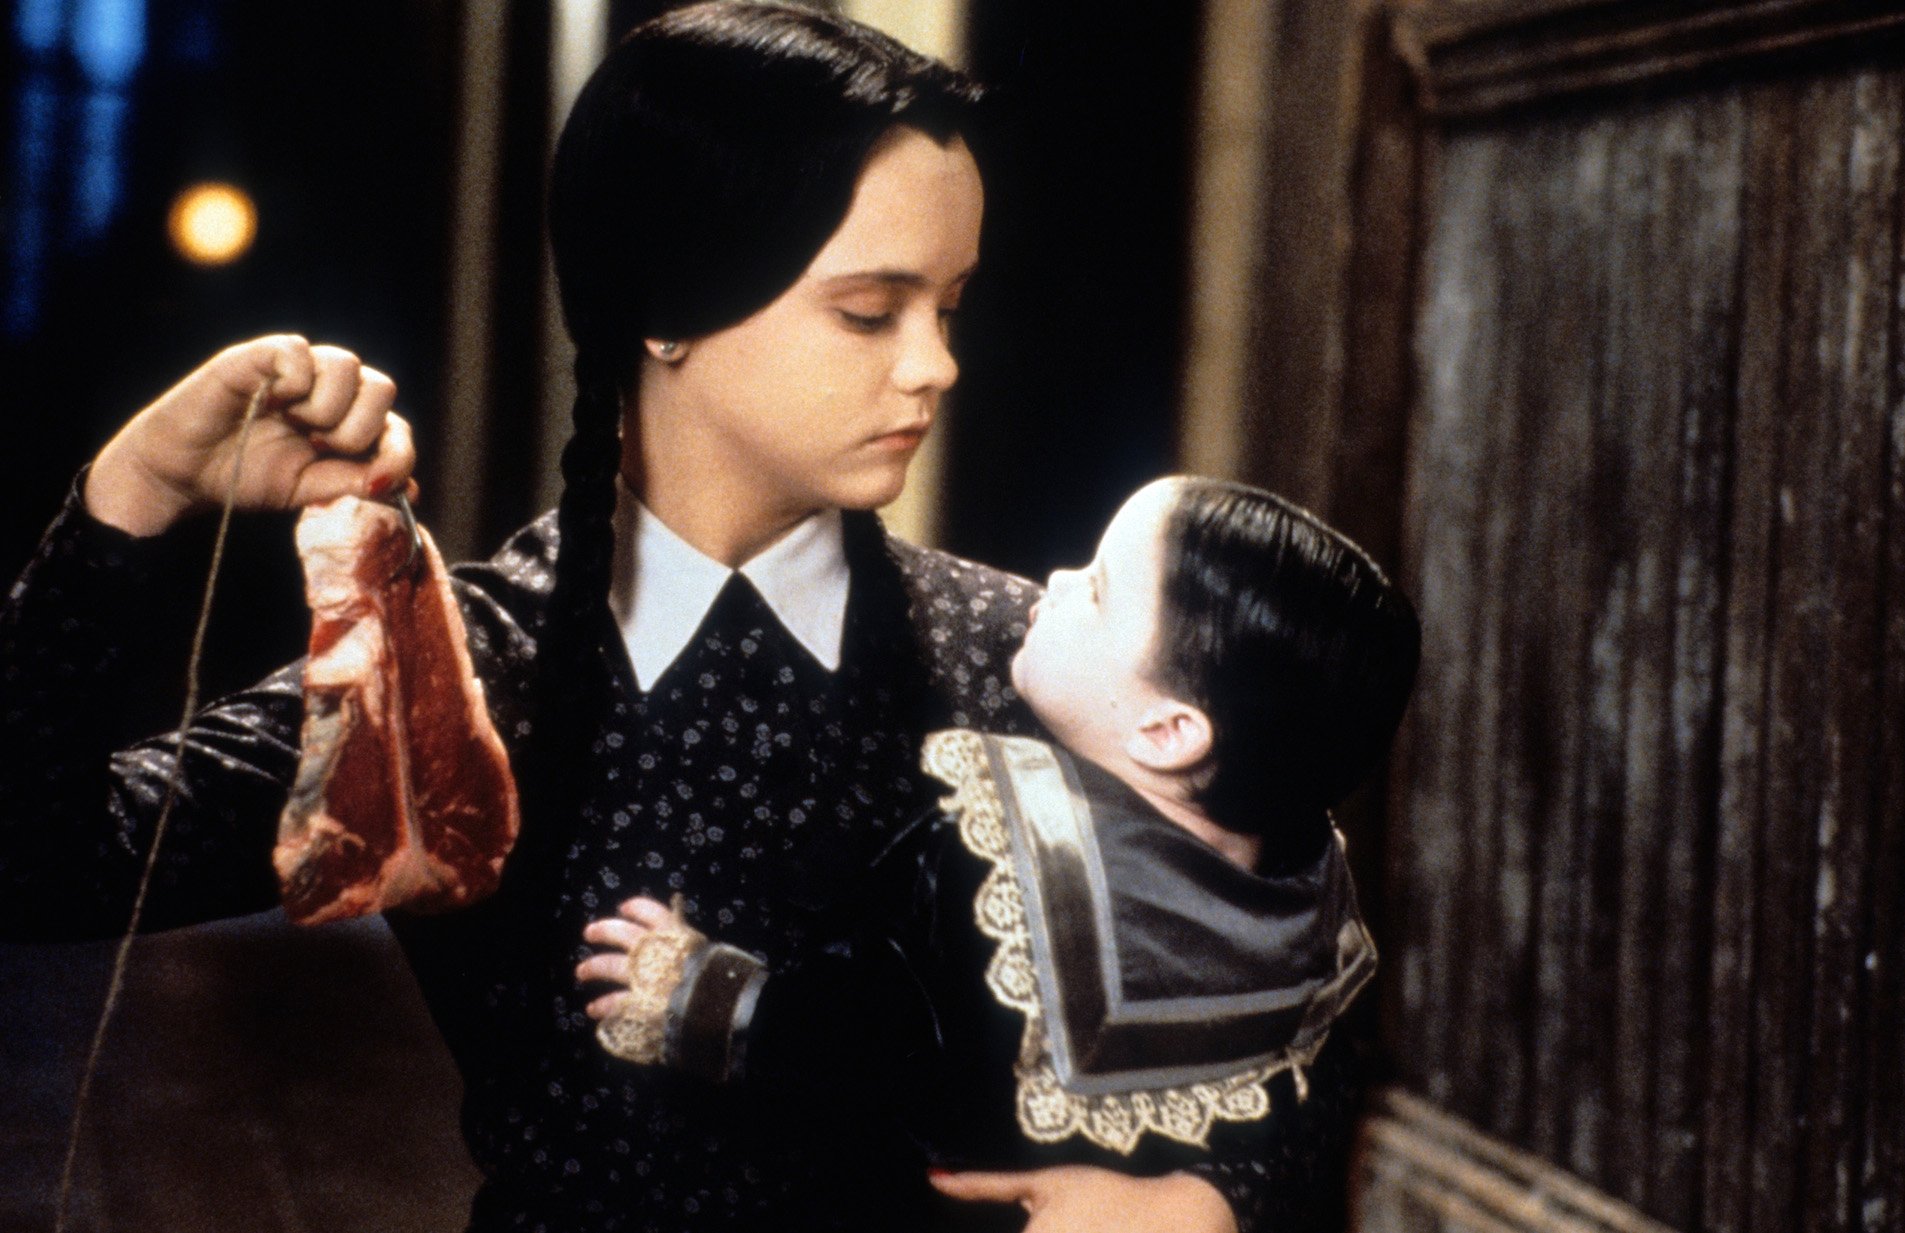 Christina Ricci as Wednesday Addams dangling meat in front of a baby in 'Addams Family Values'